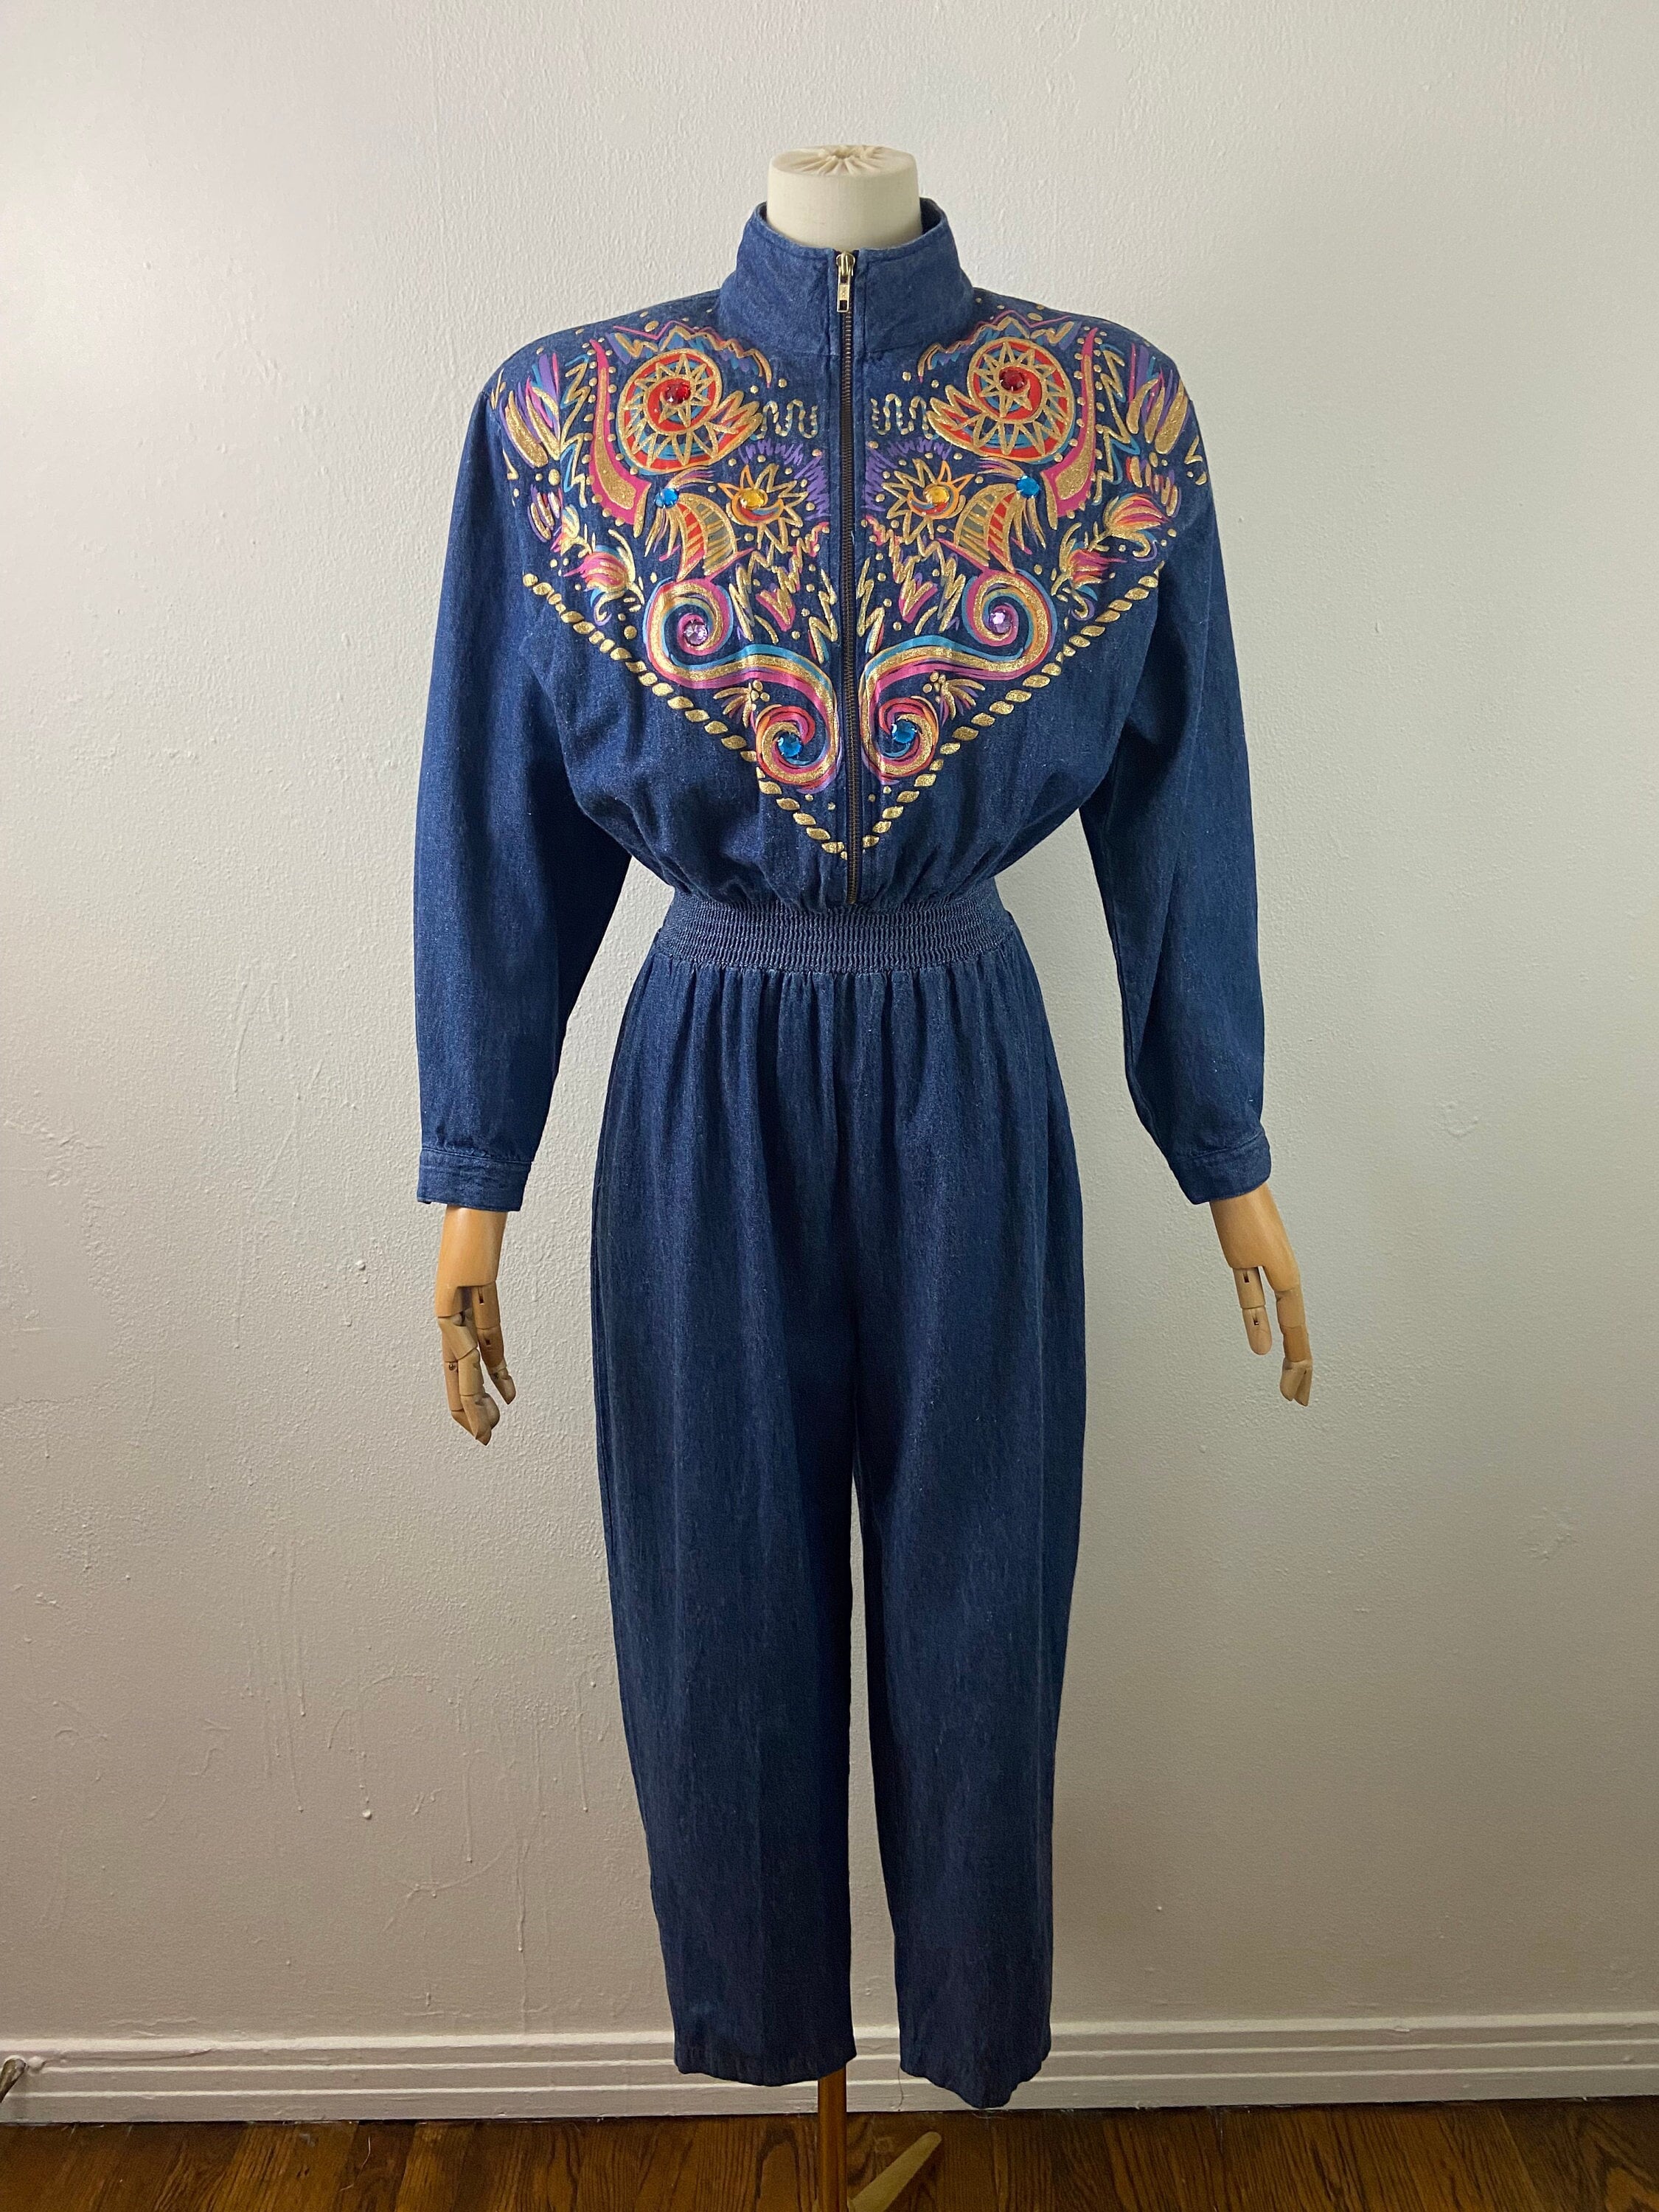 Women's Jeans Denim Jumpsuit/overall High Waisted Bell Bottoms Pants , vintage 70s,boho, Hippie. Made to Order. 